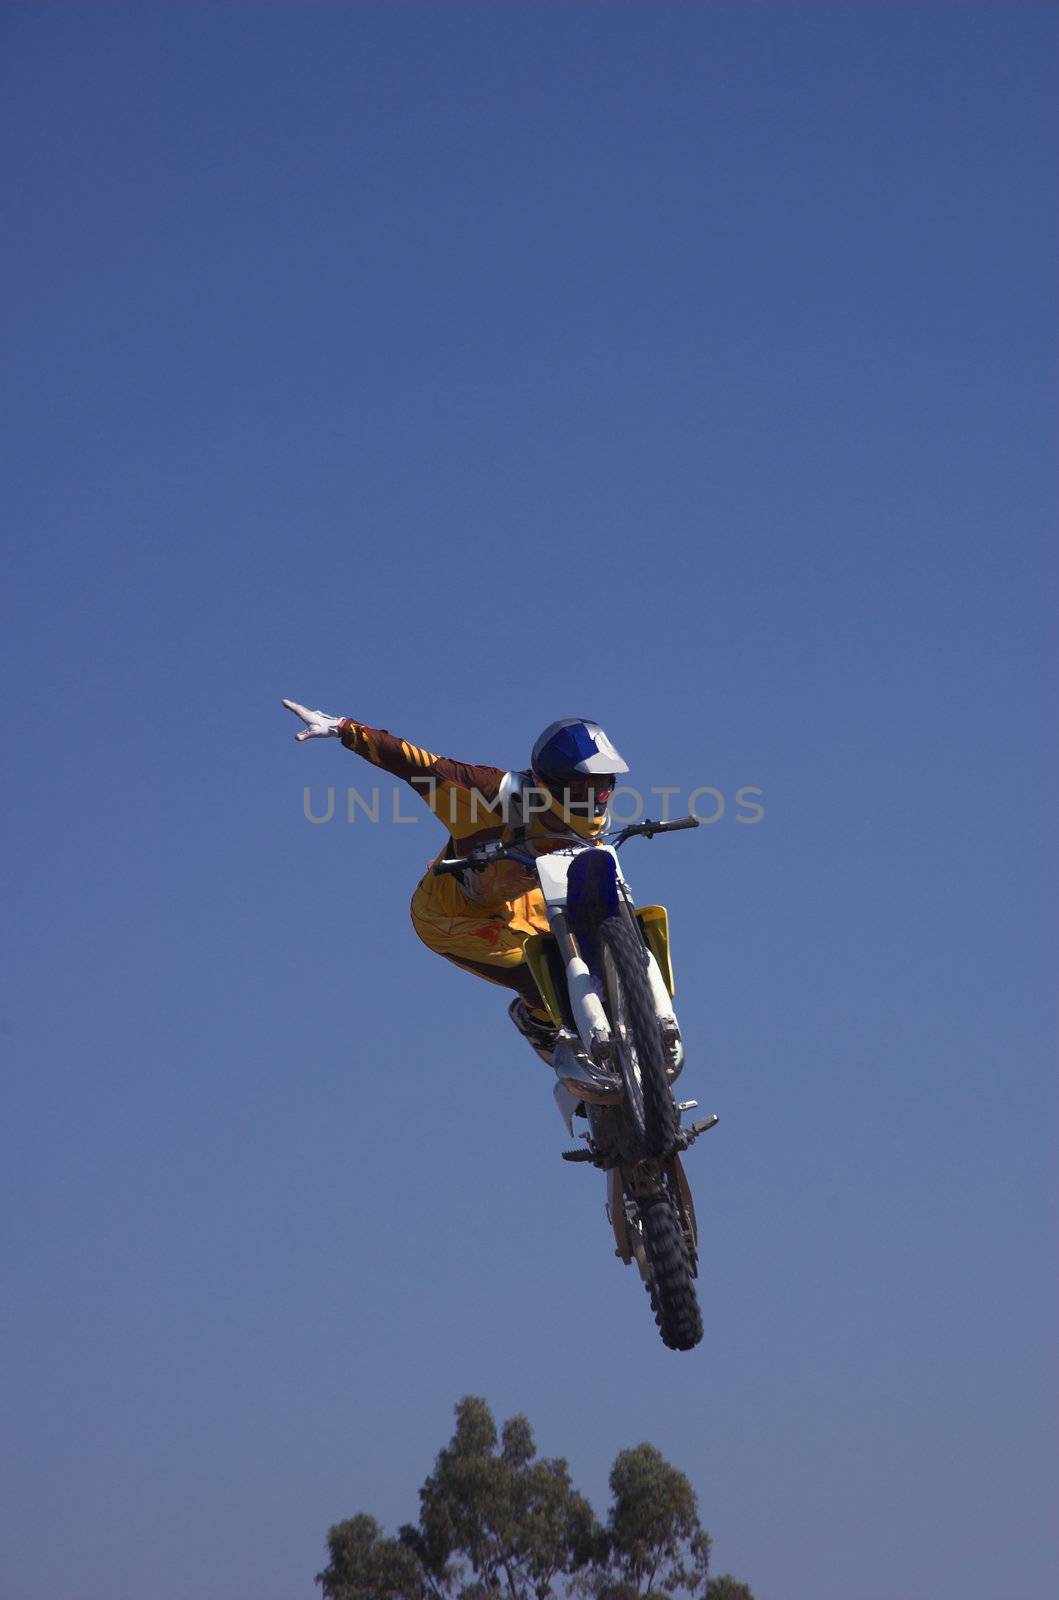 Moto X Freestyle rider high in sky with arms outstretched